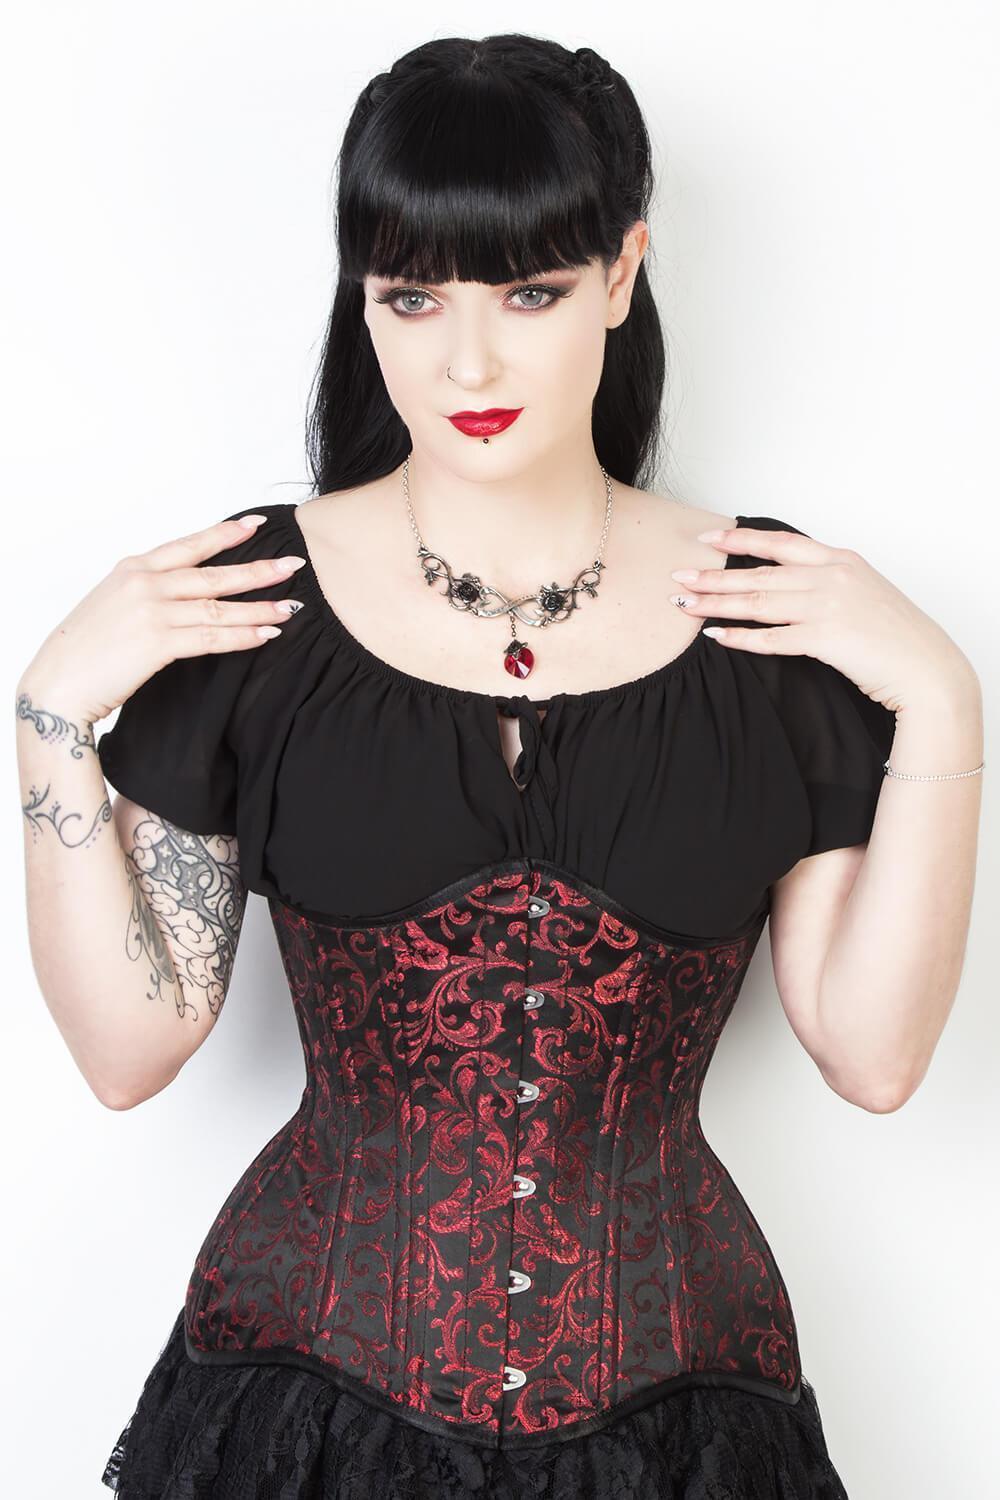 Physical Benefits of Wearing a Corset – Lucy's Corsetry